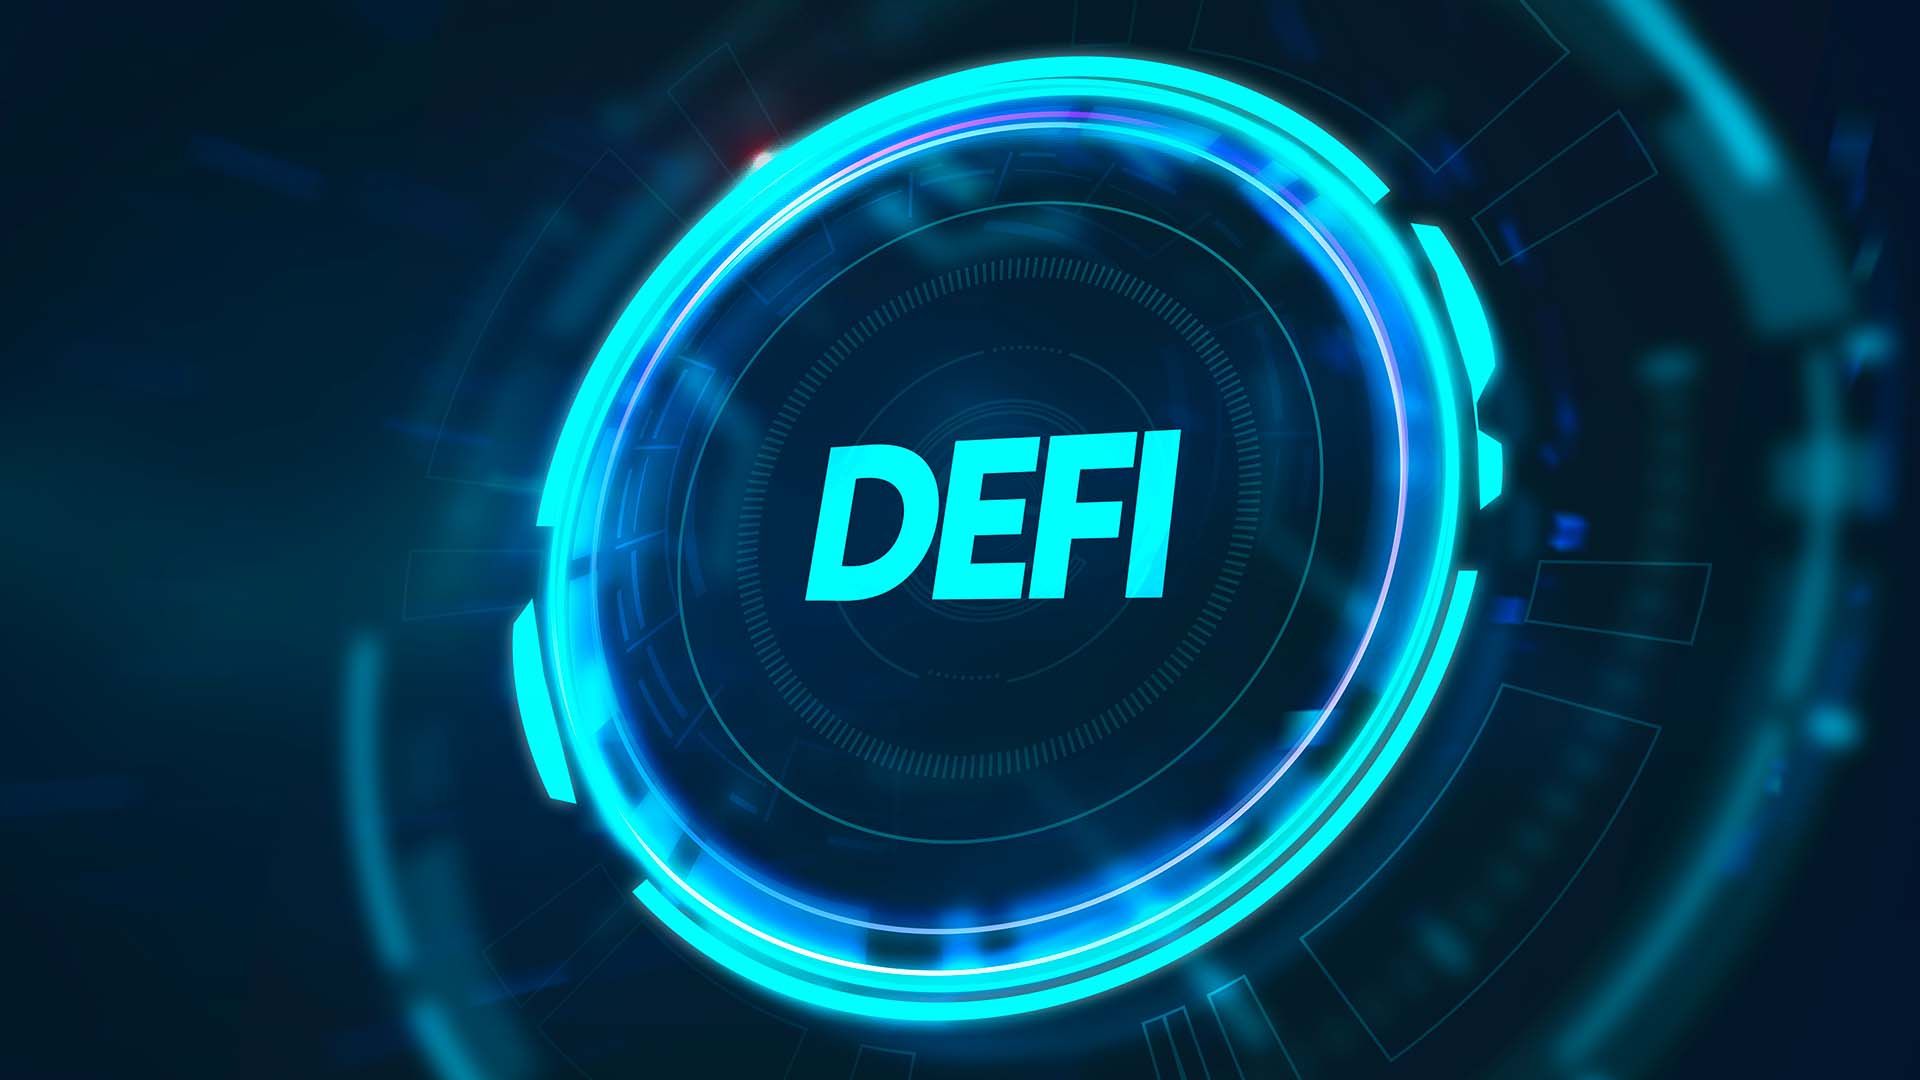 DeFi: What are the advantages and disadvantages of decentralized financing?